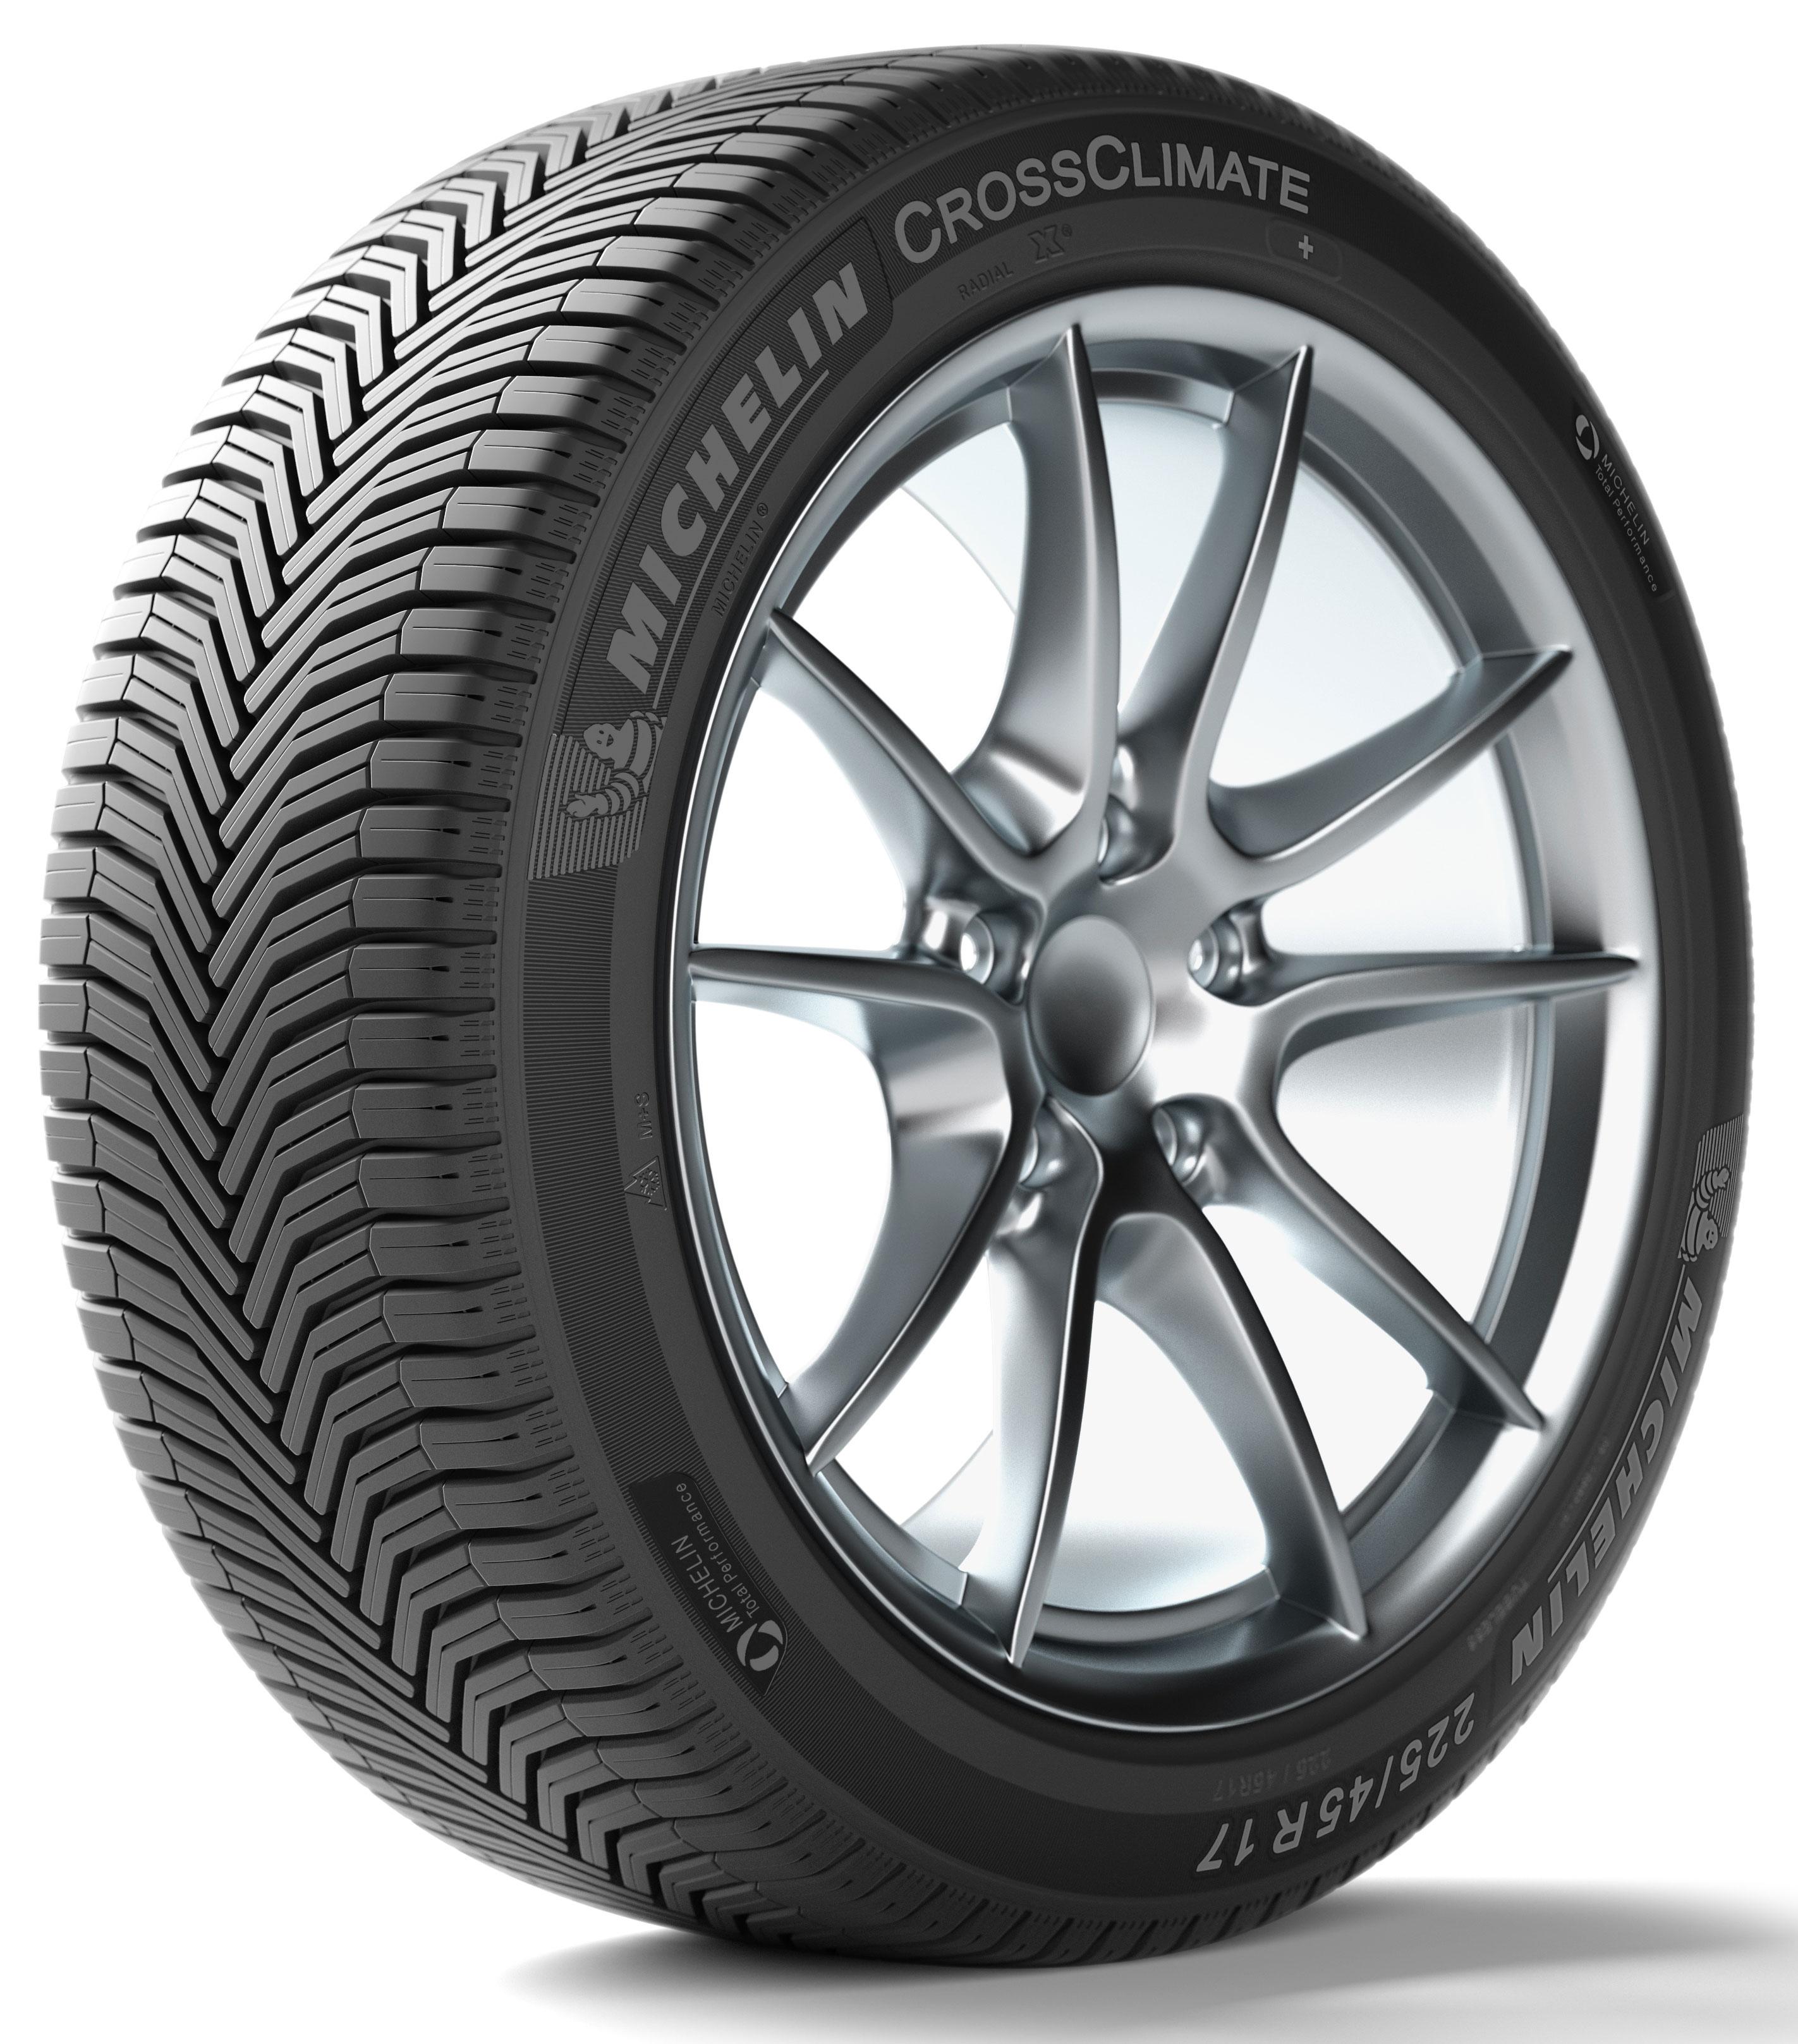 Anvelope all seasons MICHELIN CrossClimate+ M+S XL 185/60 R14 86H